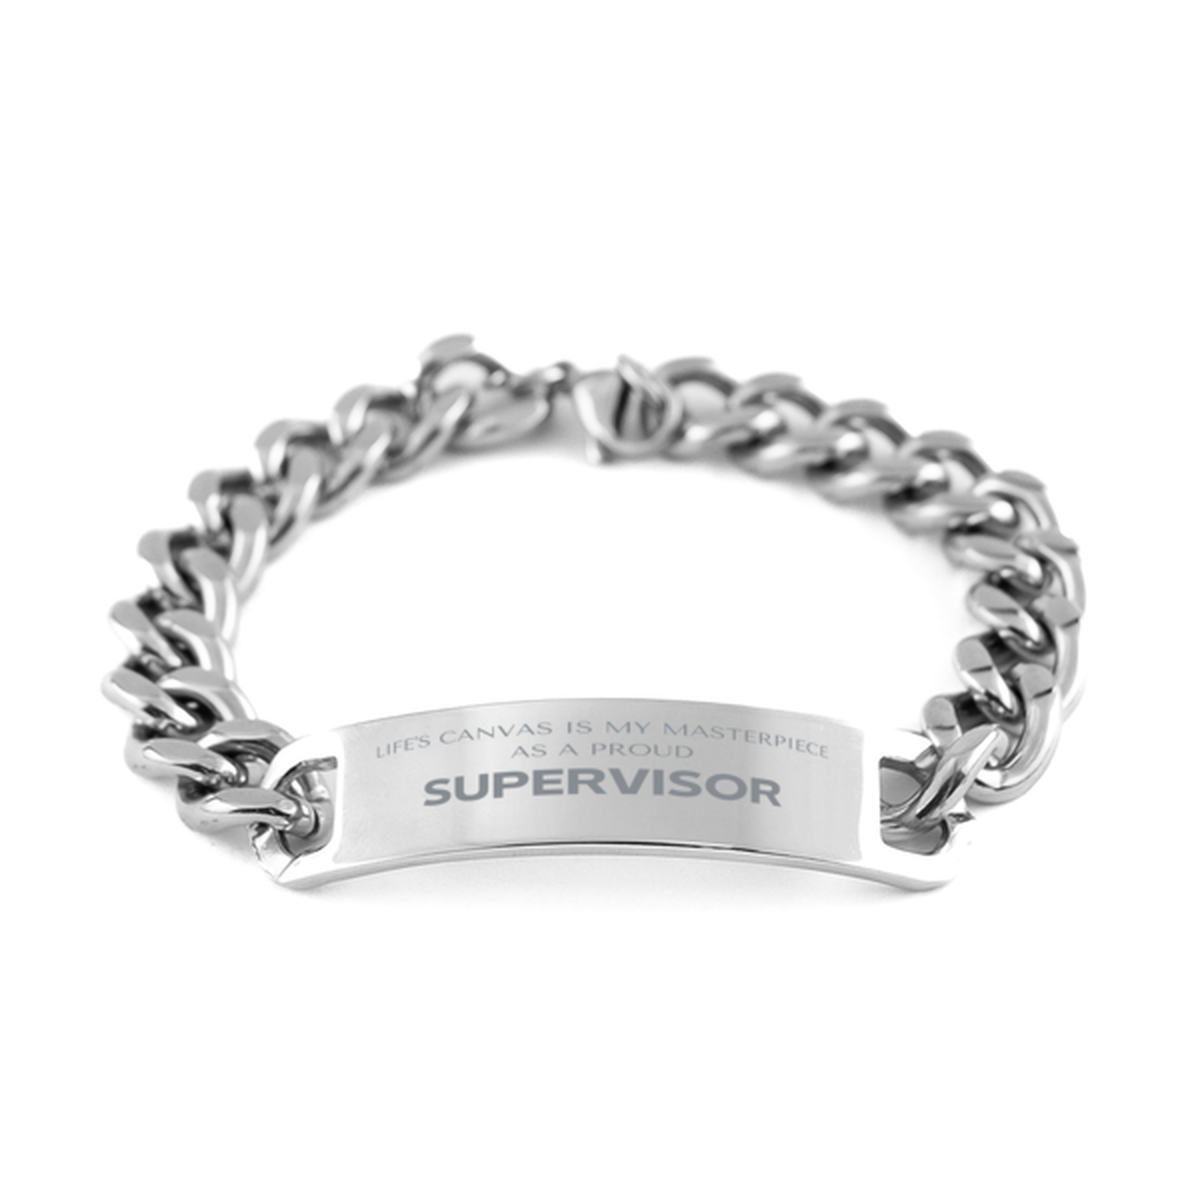 Proud Supervisor Gifts, Life's canvas is my masterpiece, Epic Birthday Christmas Unique Cuban Chain Stainless Steel Bracelet For Supervisor, Coworkers, Men, Women, Friends